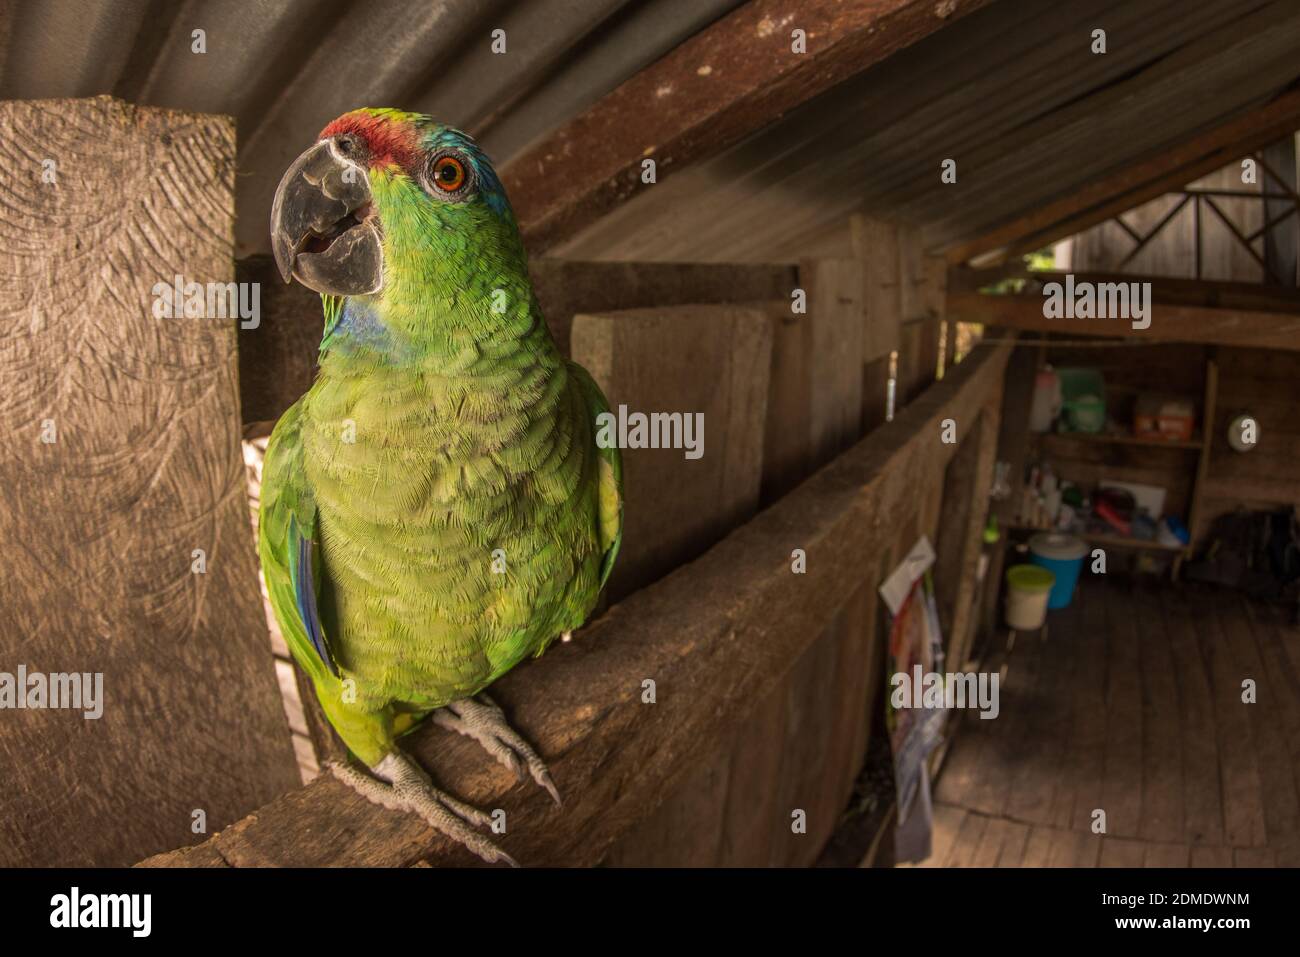 A festive amazon parrot (Amazona festiva) illegally collected from the wild and now living life as a pet in a Colombian villlage. Stock Photo